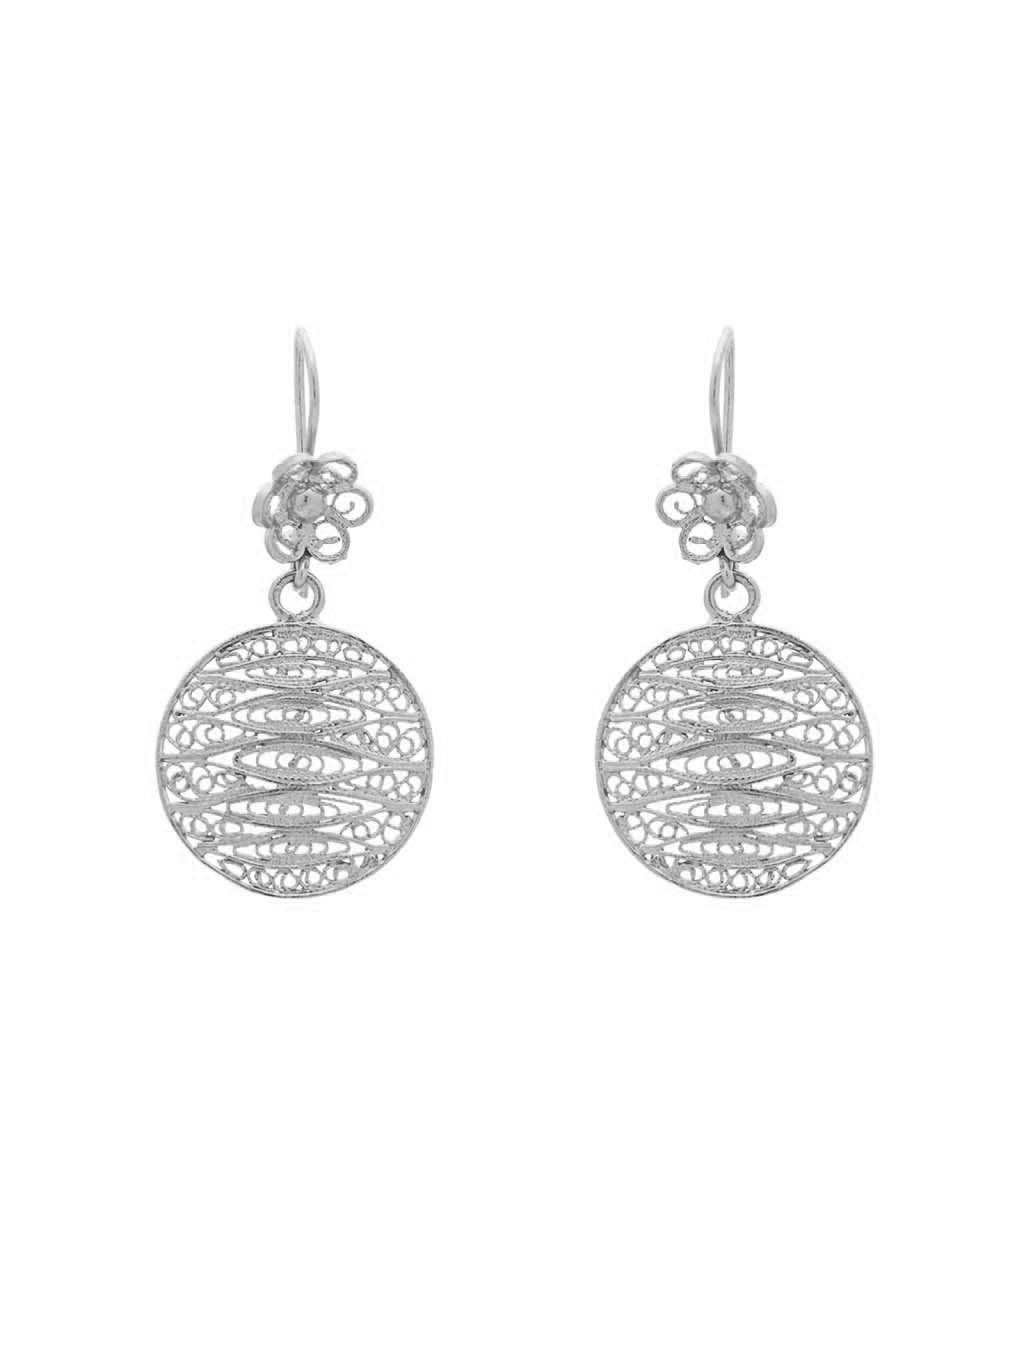 earrings Round Filigree with Flower